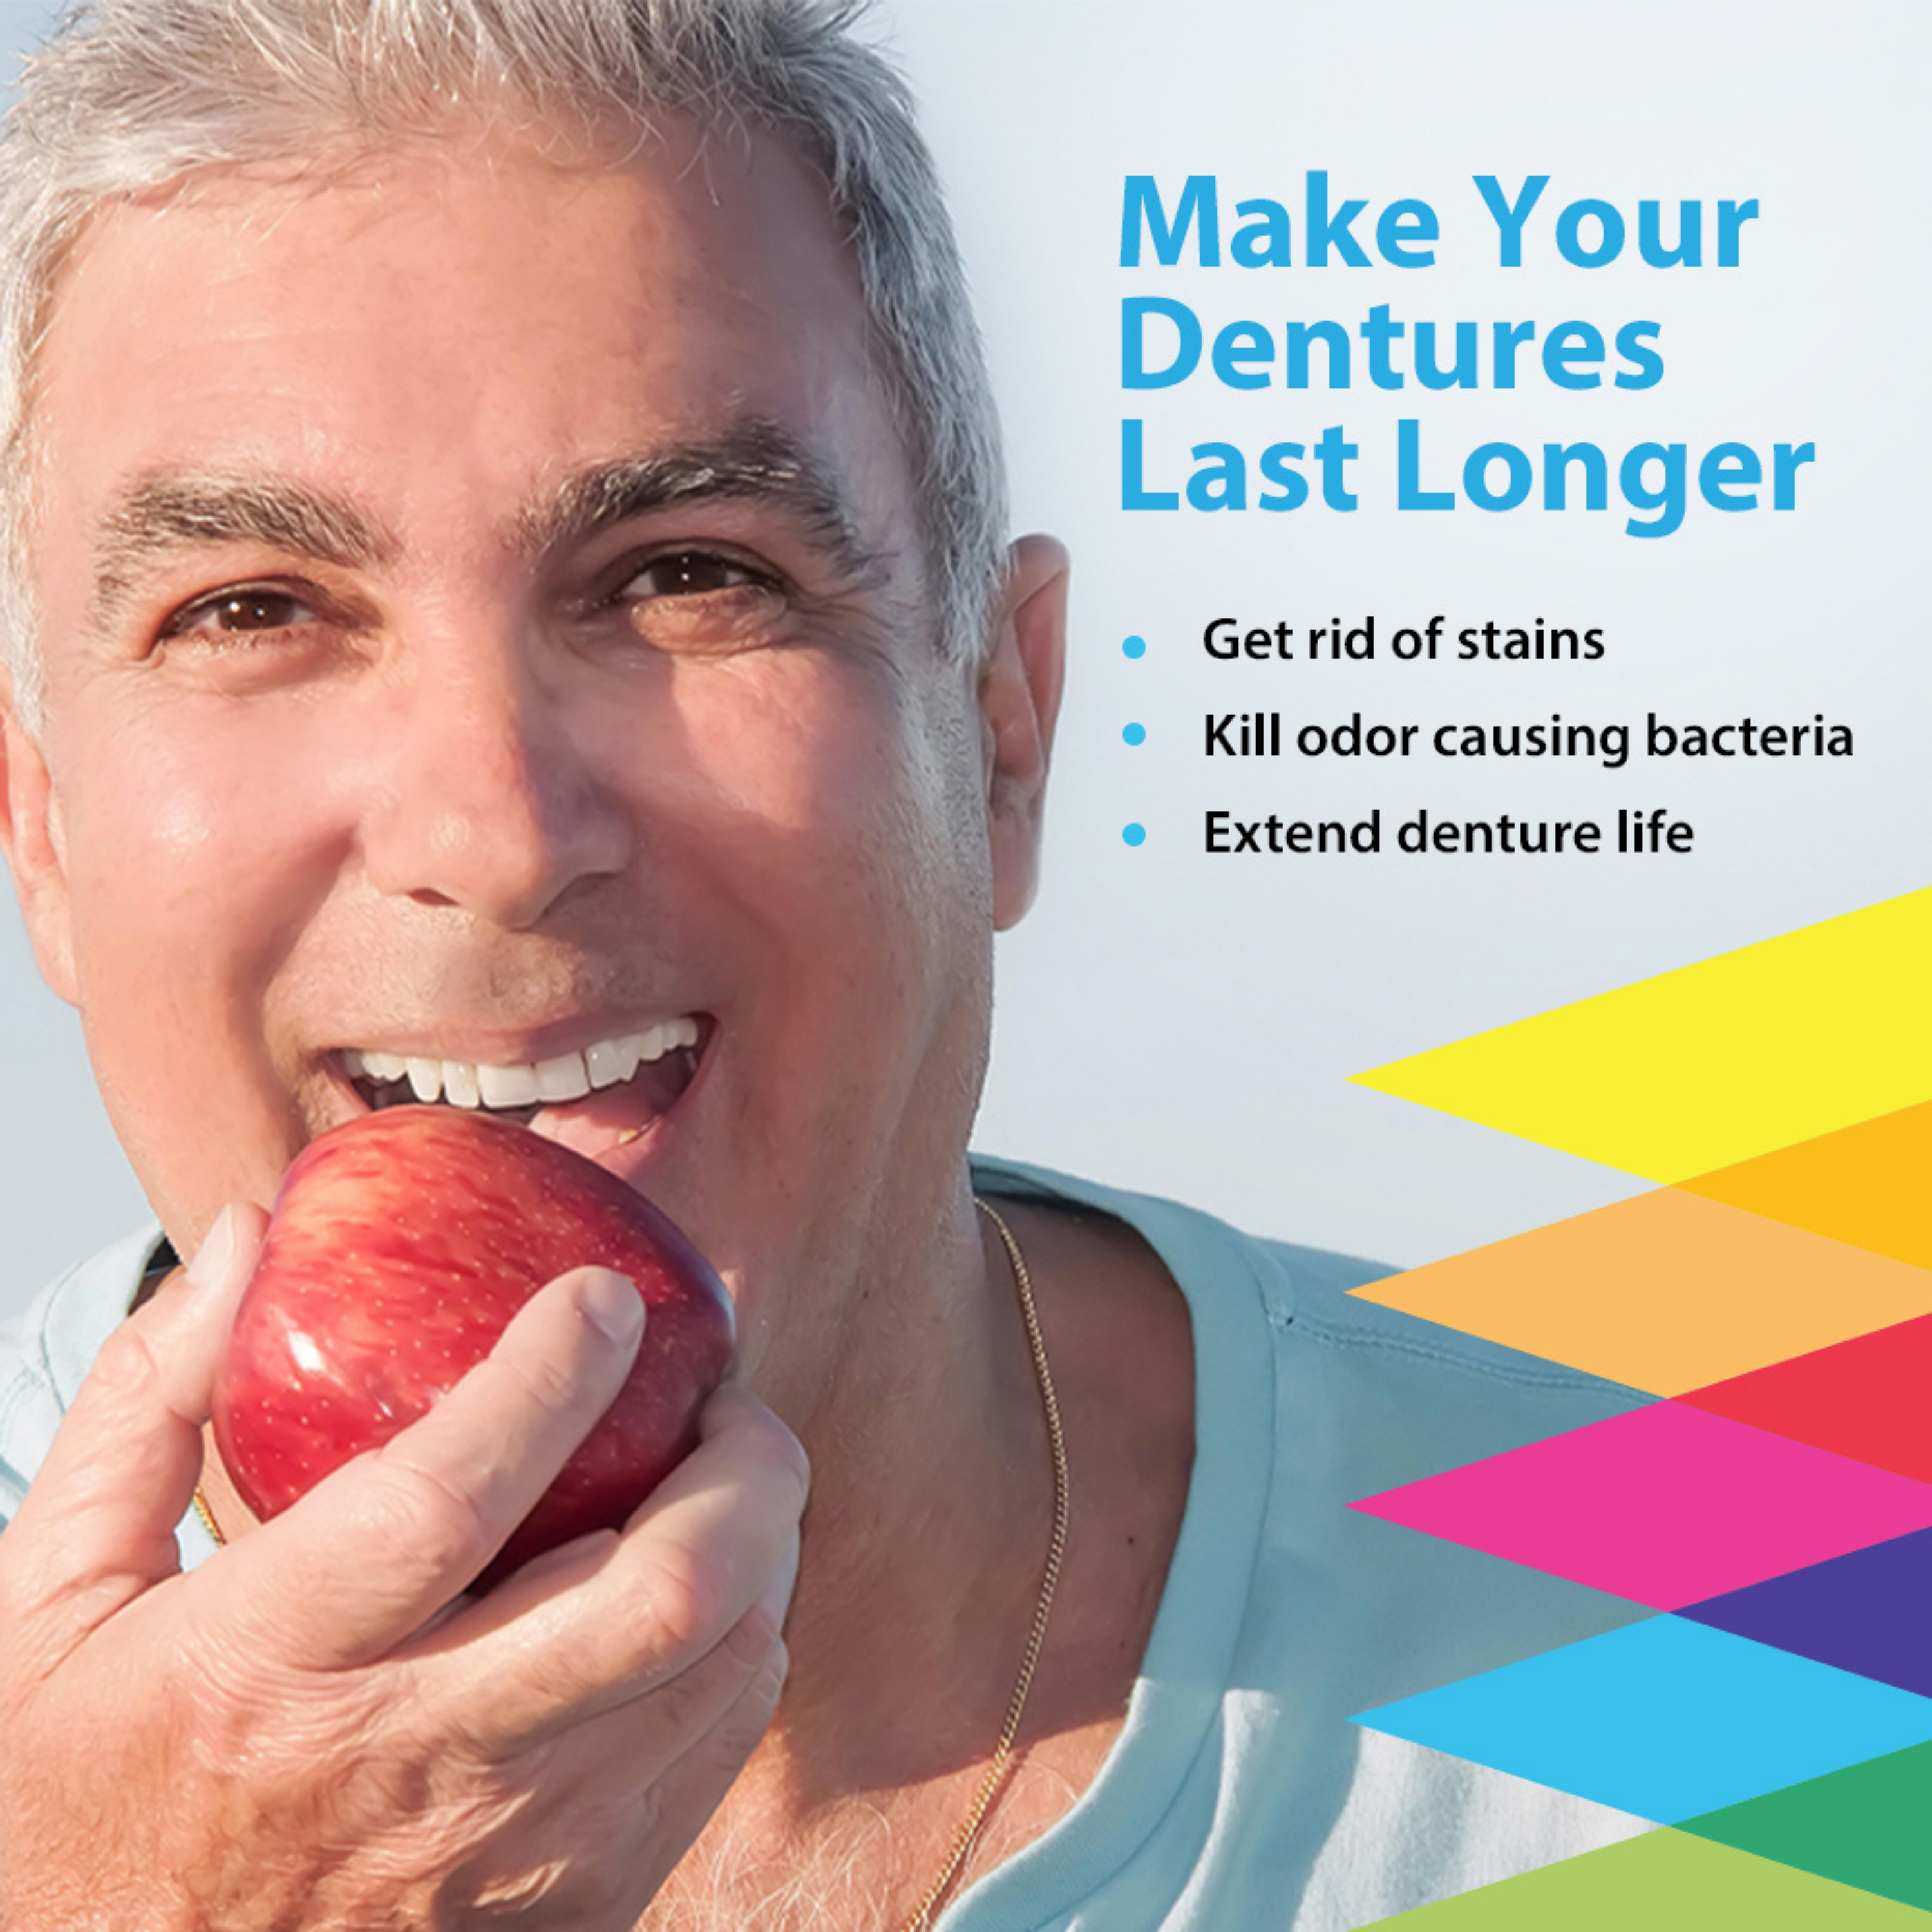 XODENT All-in-One Denture Cleaning Basic Kit with 30 Days Supply of Denture Cleaning Tablets